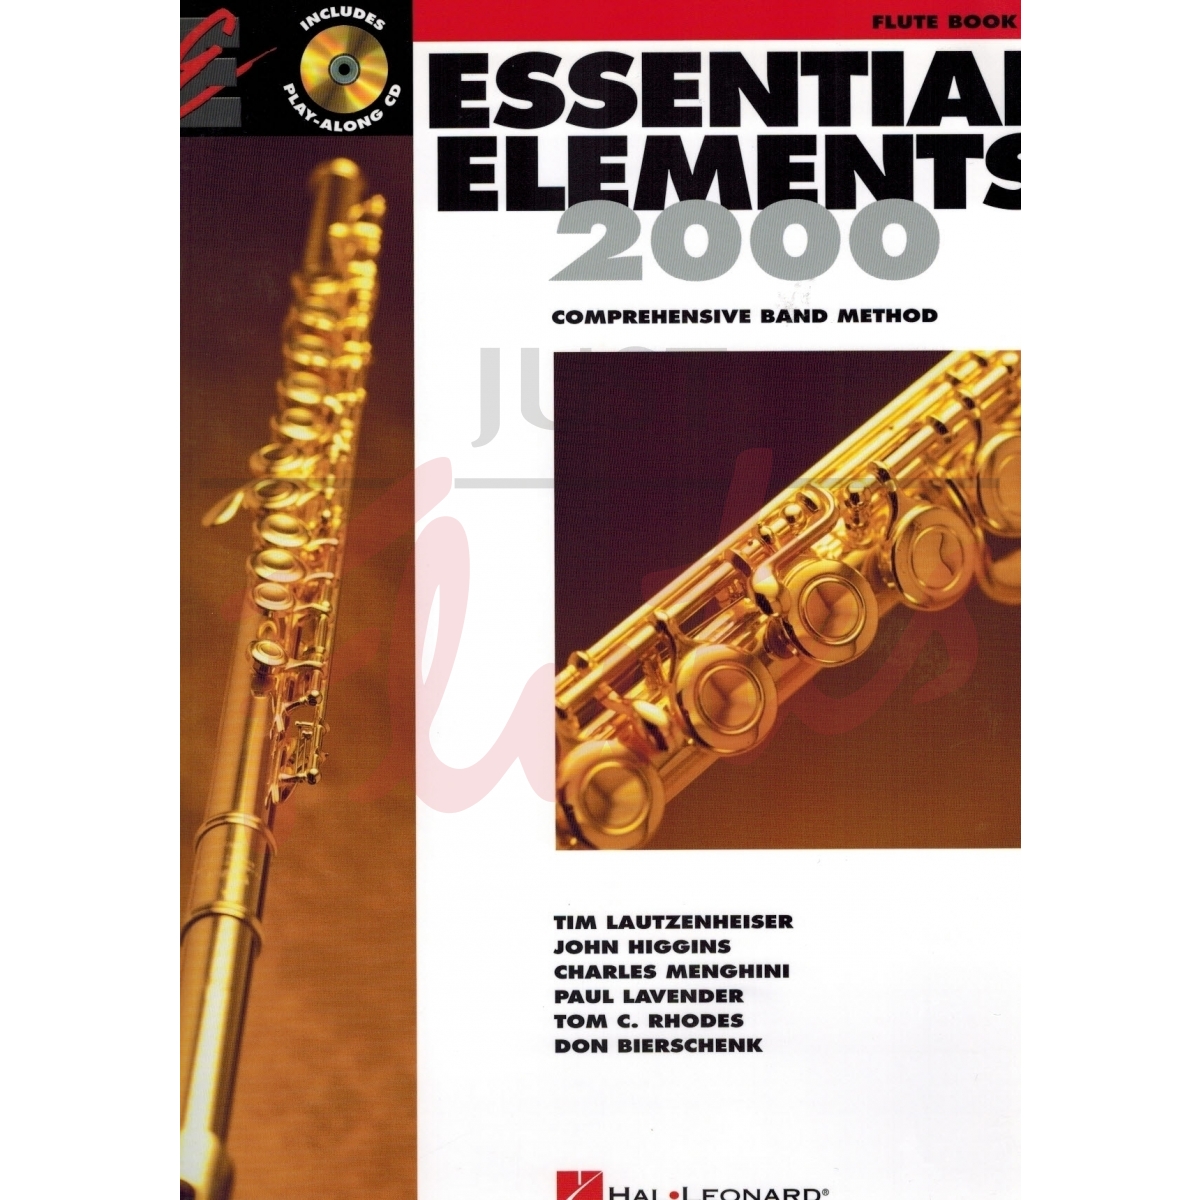 Essential Elements 2000 [Flute] Book 2